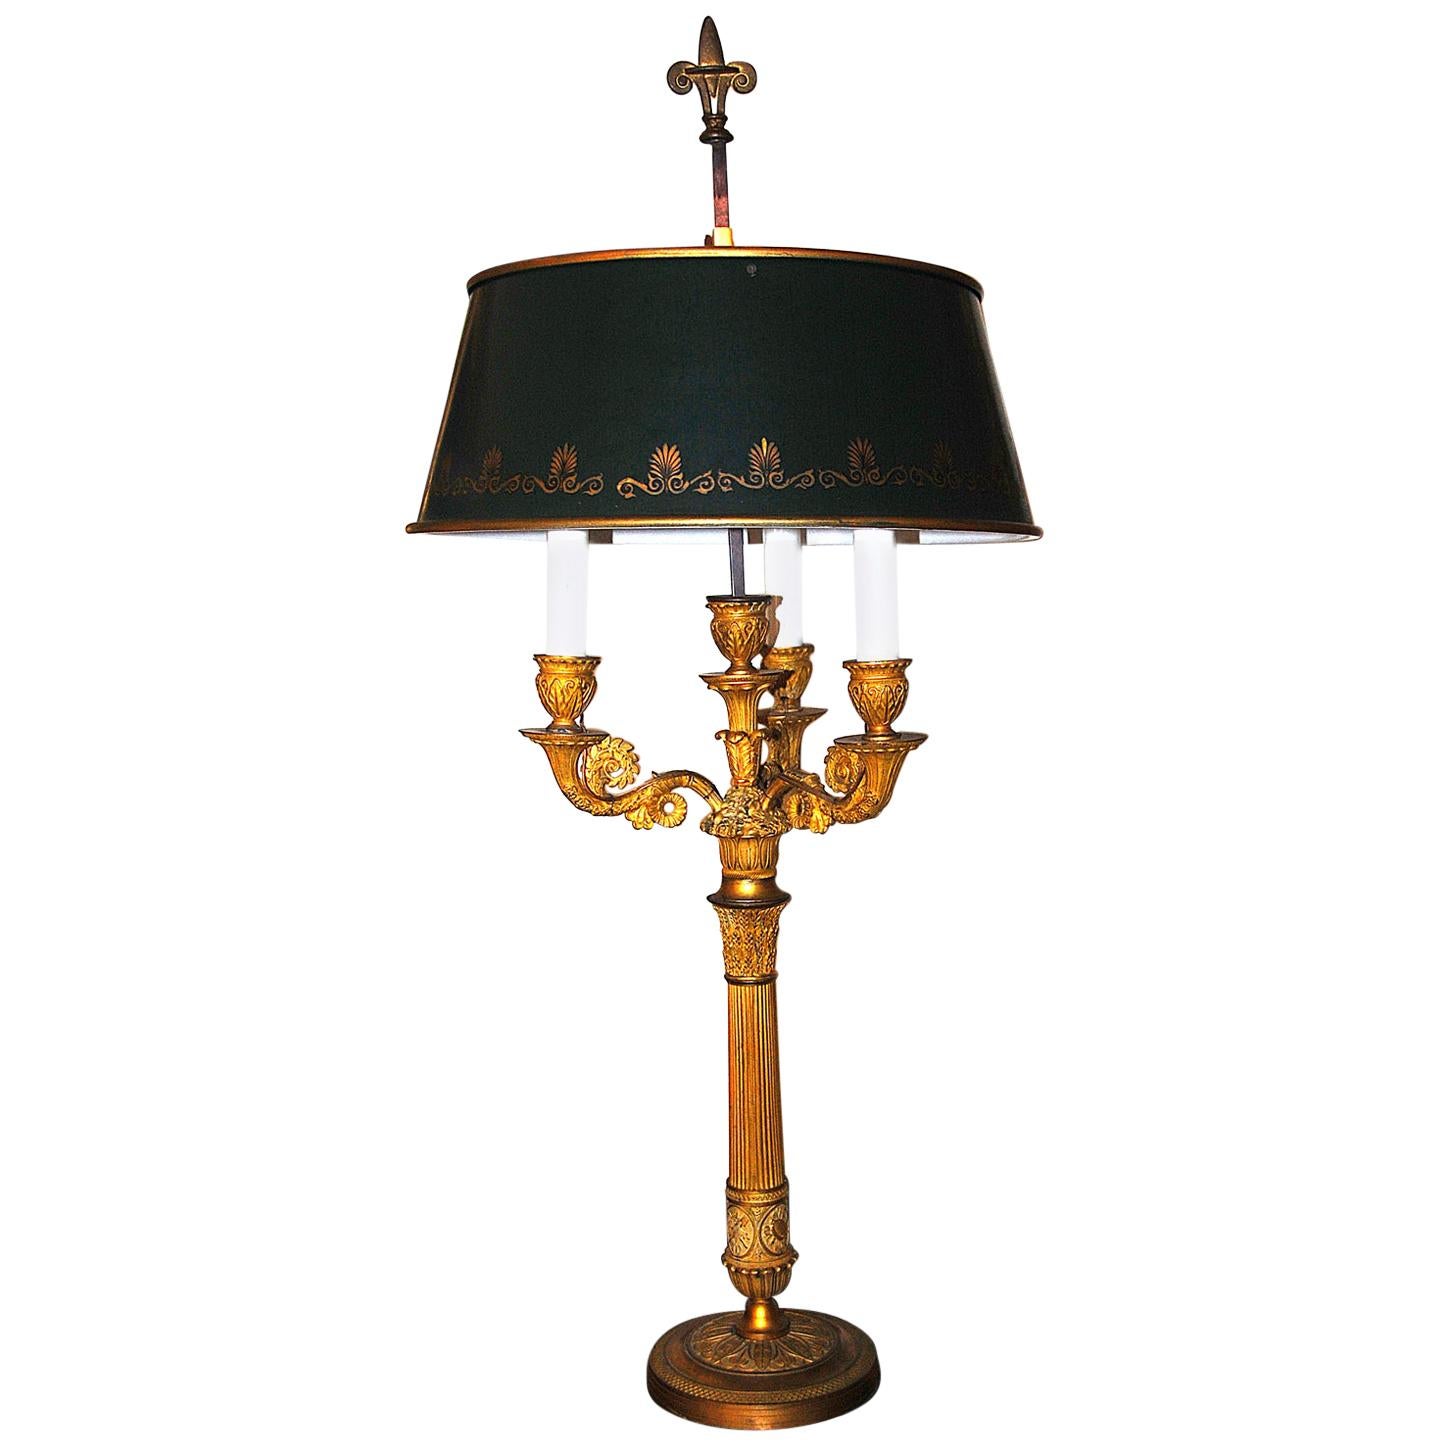 French Ormolu Electrified Three-Light Candelabra with Adjustable Tole Shade